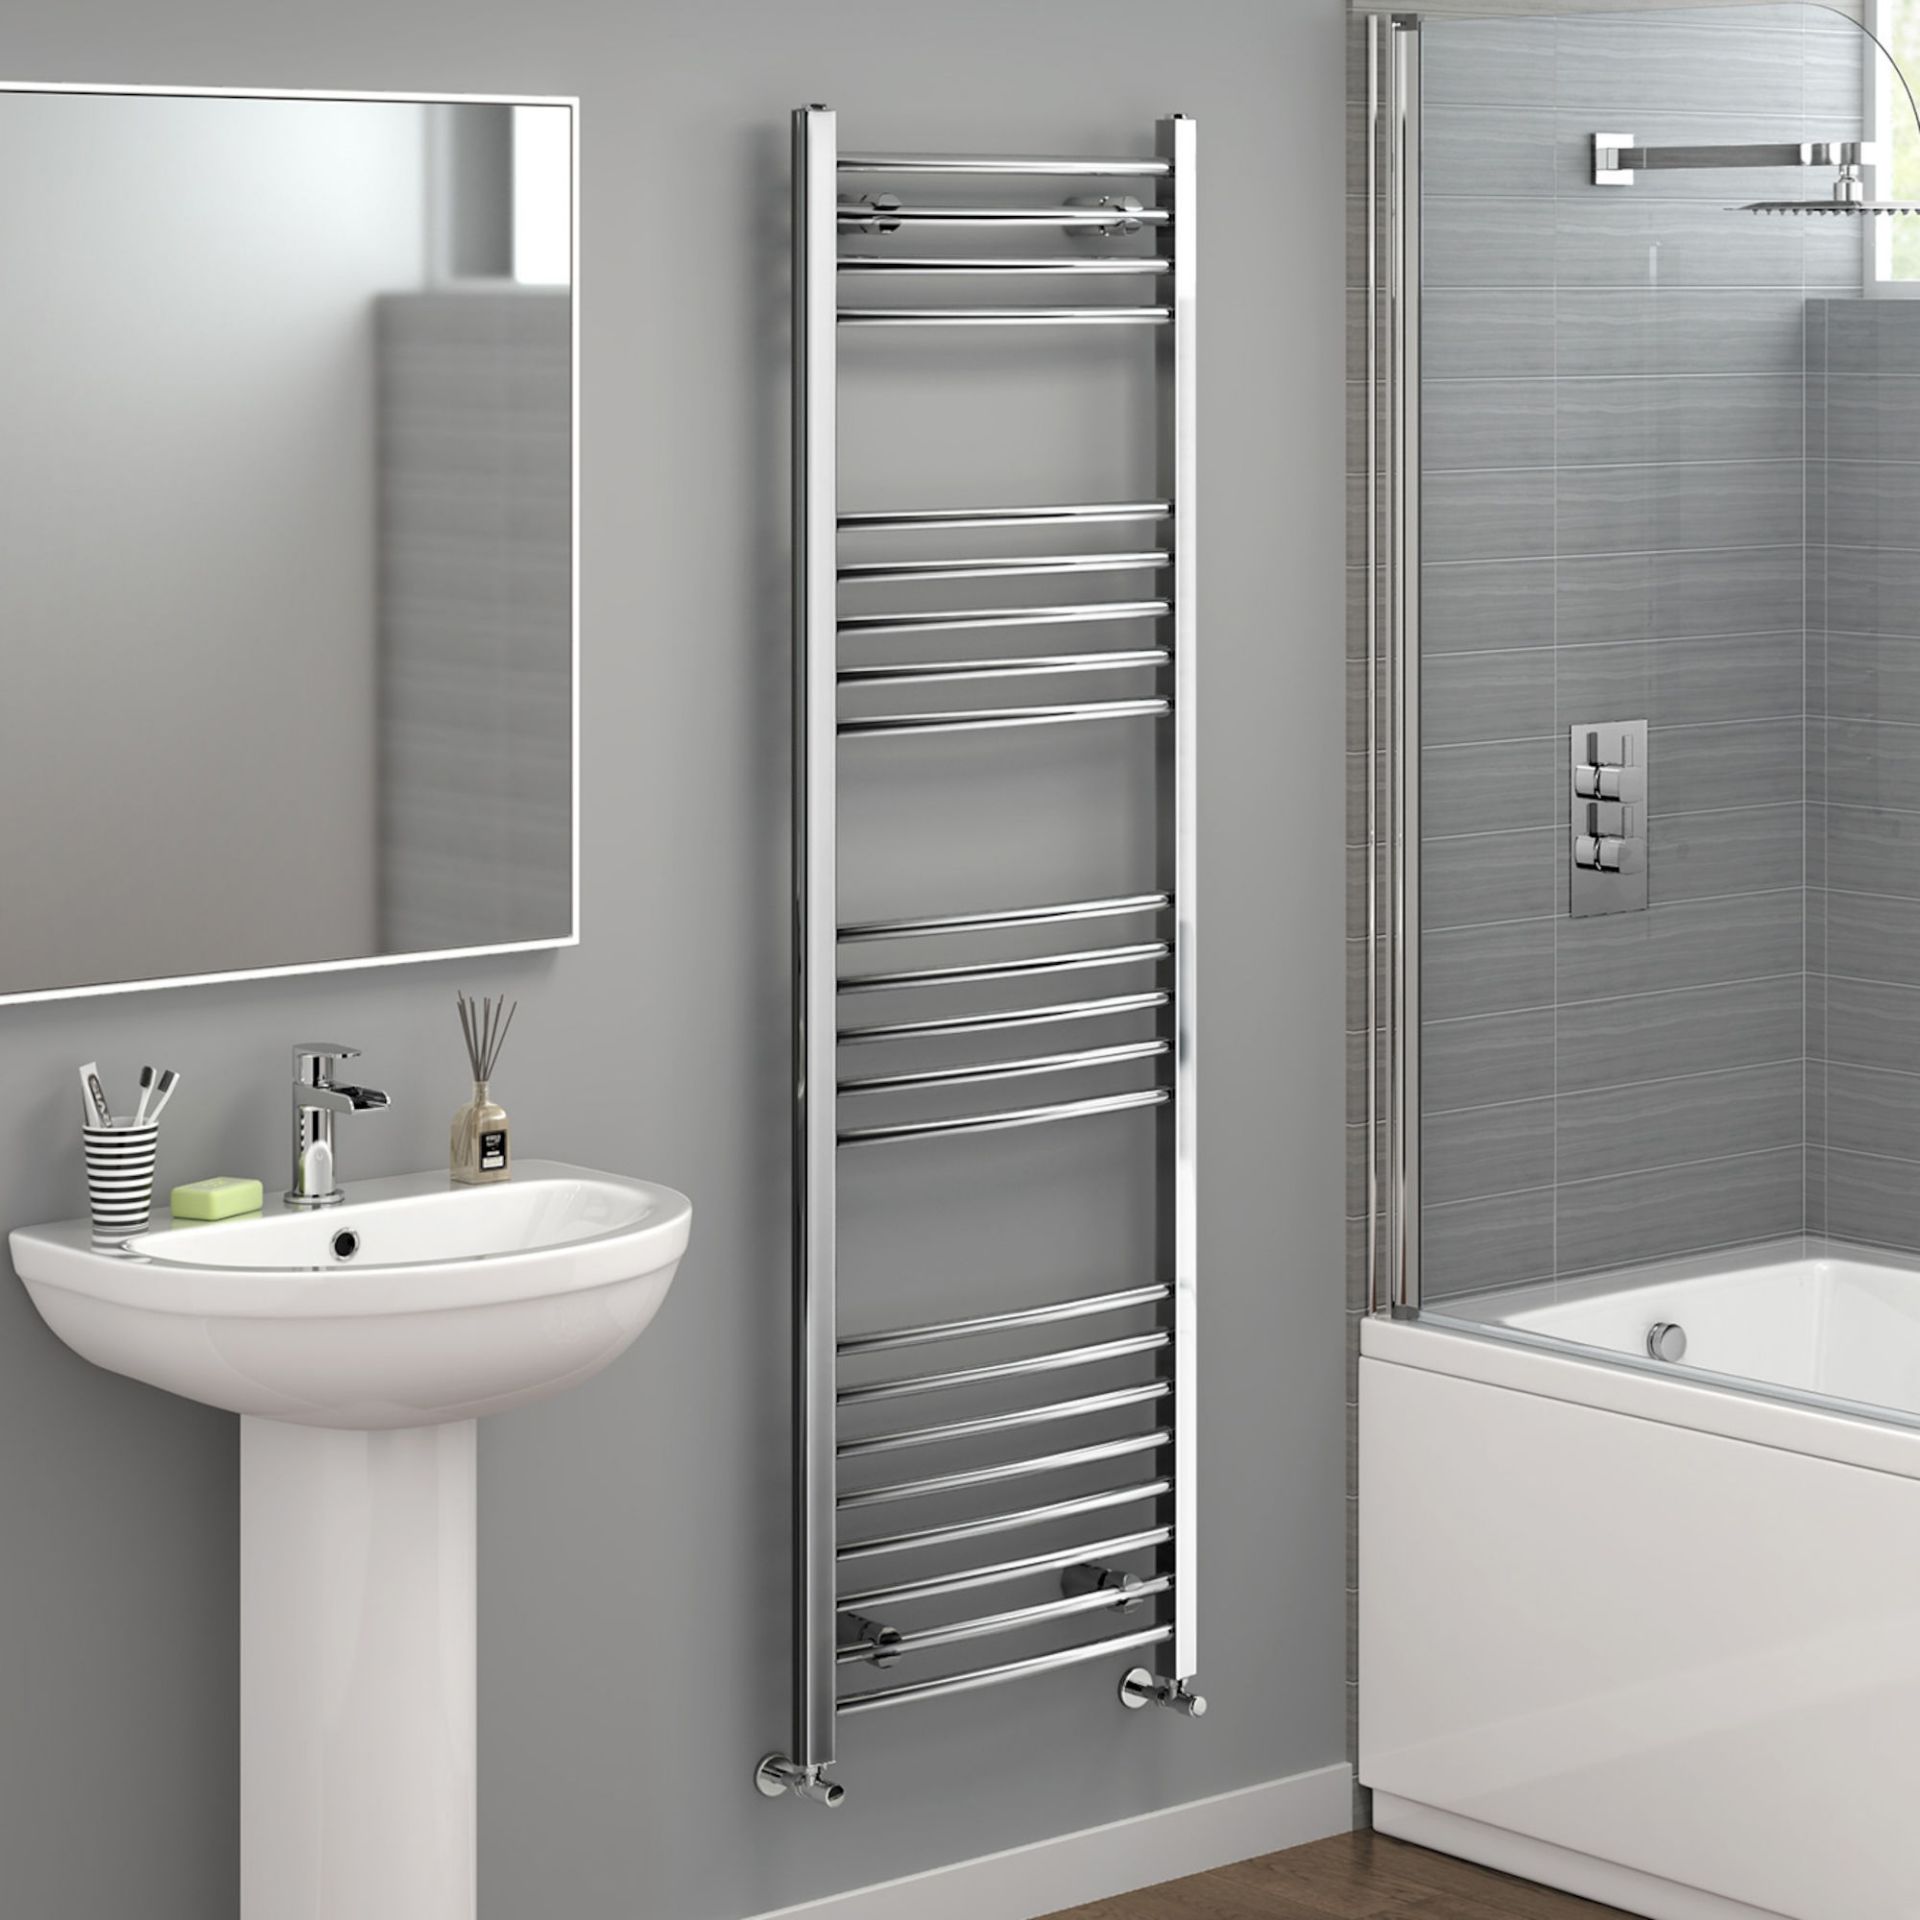 (XS321) 1600x500mm - 20mm Tubes - Chrome Curved Rail Ladder Towel Radiator. Made from chrome